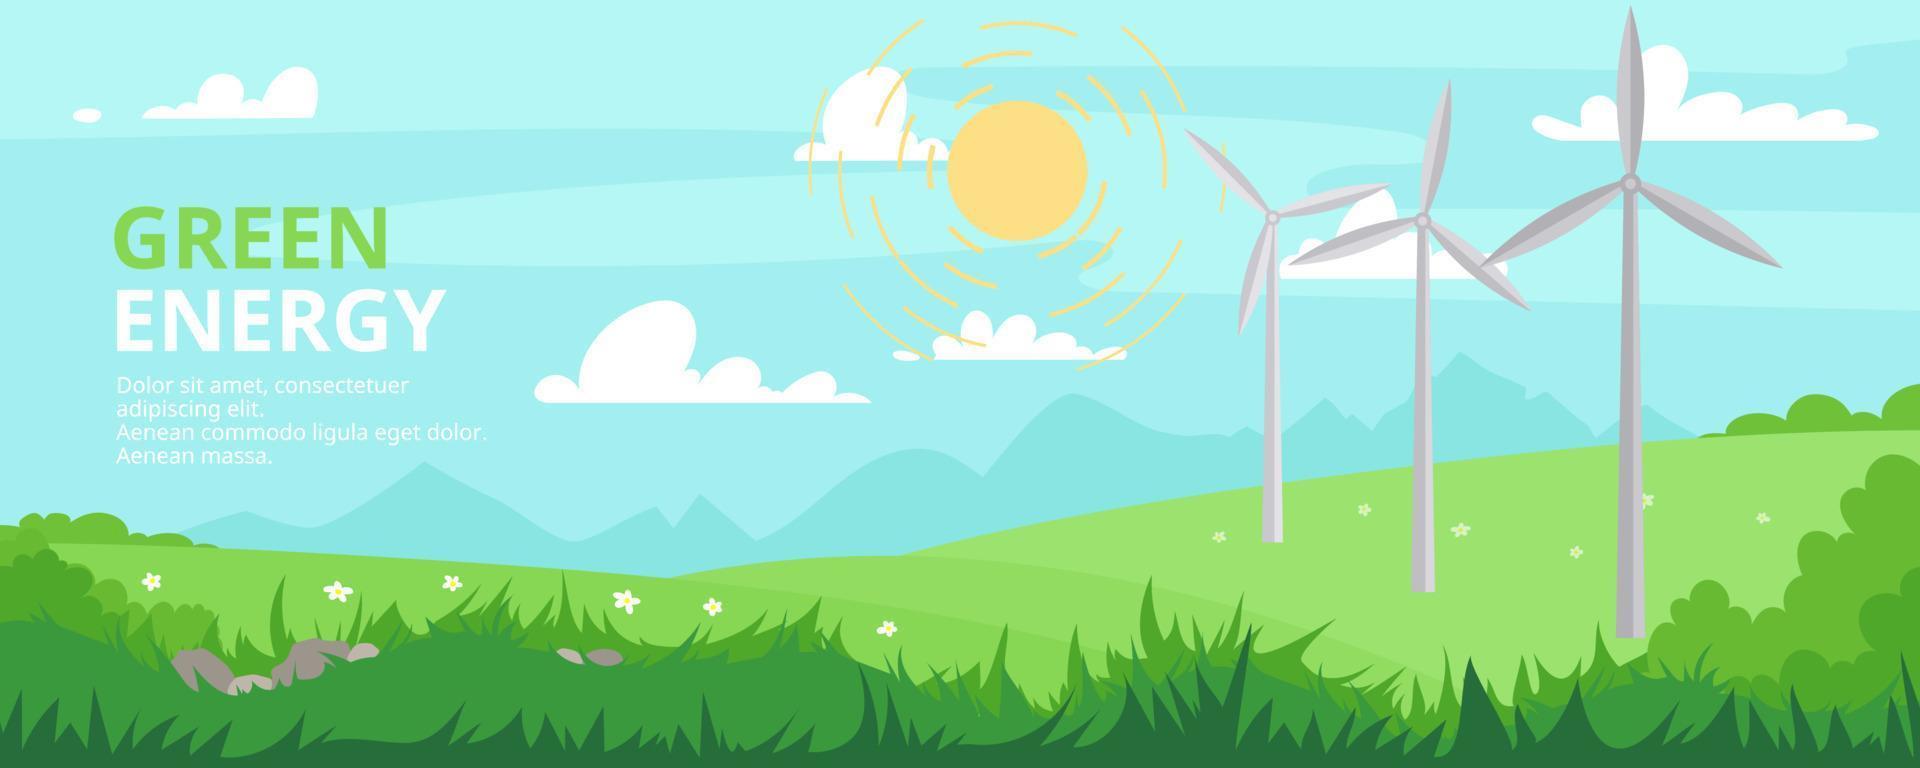 Meadow landscape banner. Wind turbines. Industrial green energy concept. Vector illustration in a flat style. Wind mill on summer background. Renewable energy sources. Wind farm and factory.